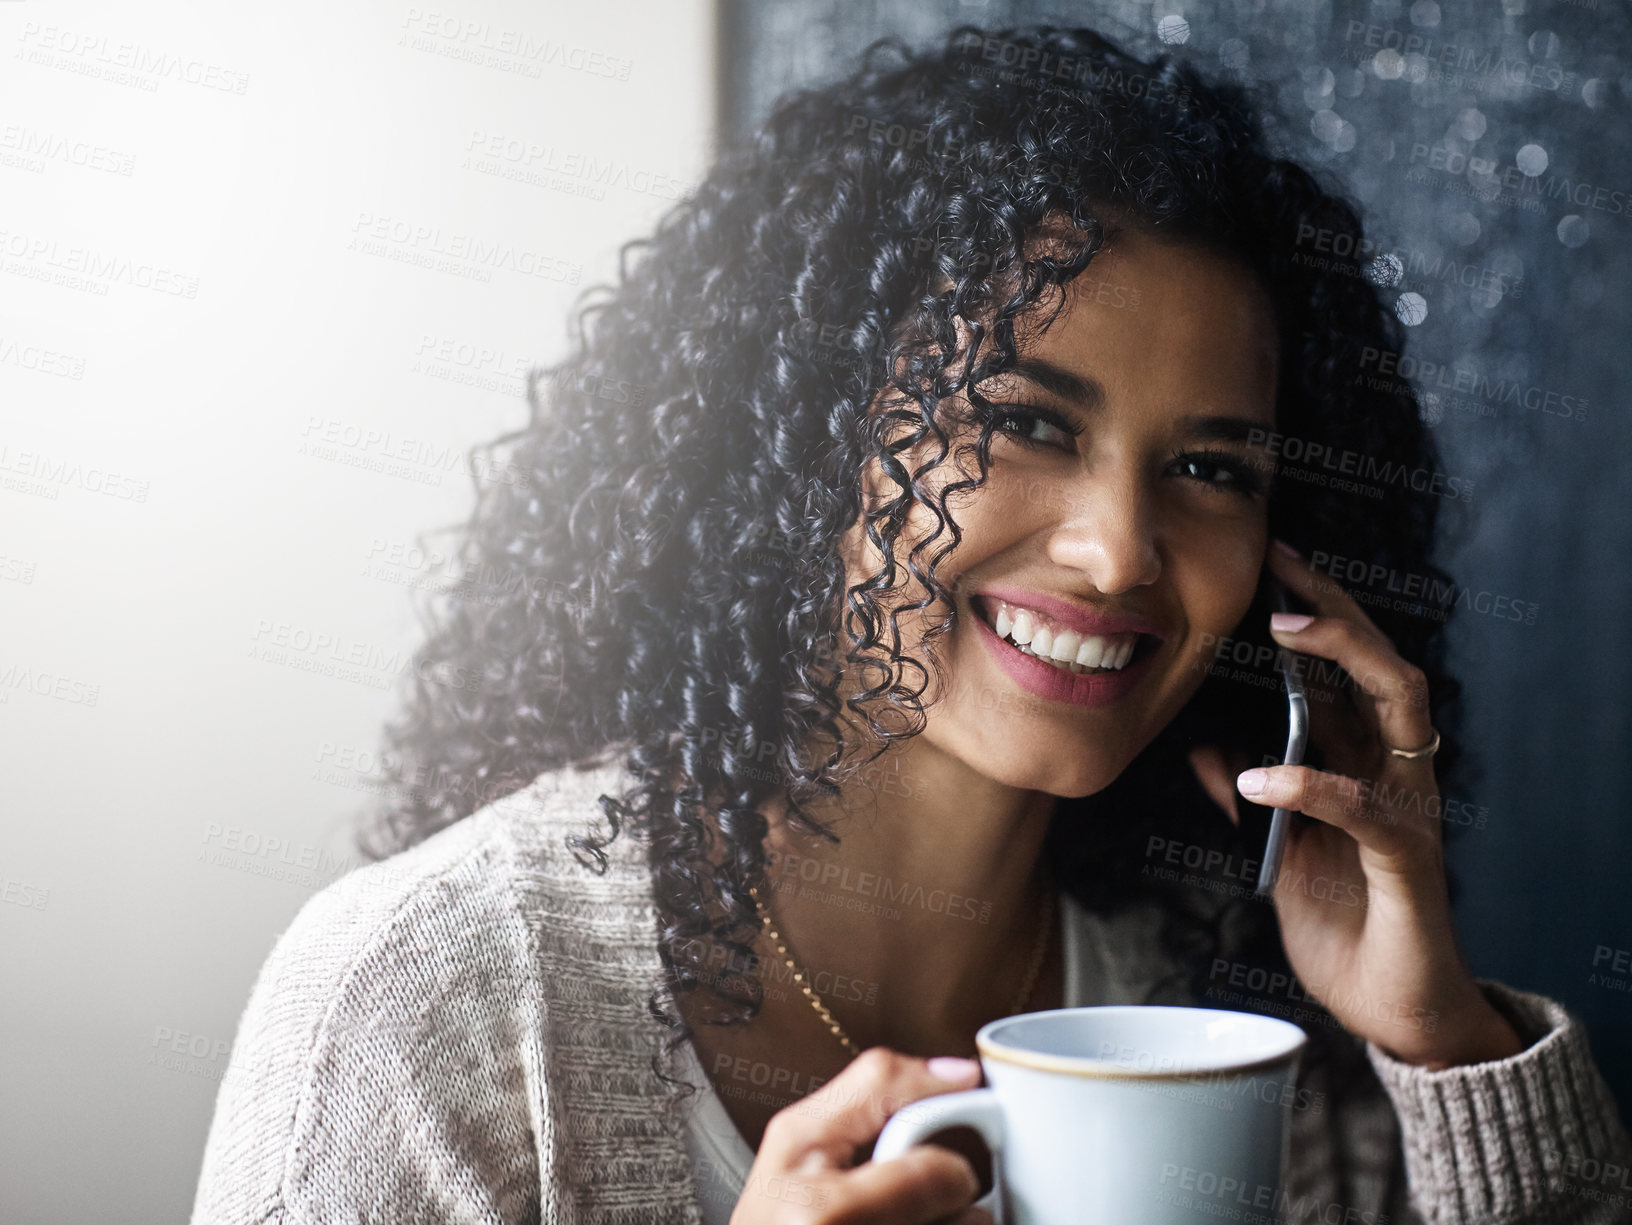 Buy stock photo Shot of a cheerful young woman relaxing and drinking coffee while talking on her cellphone at home during the day